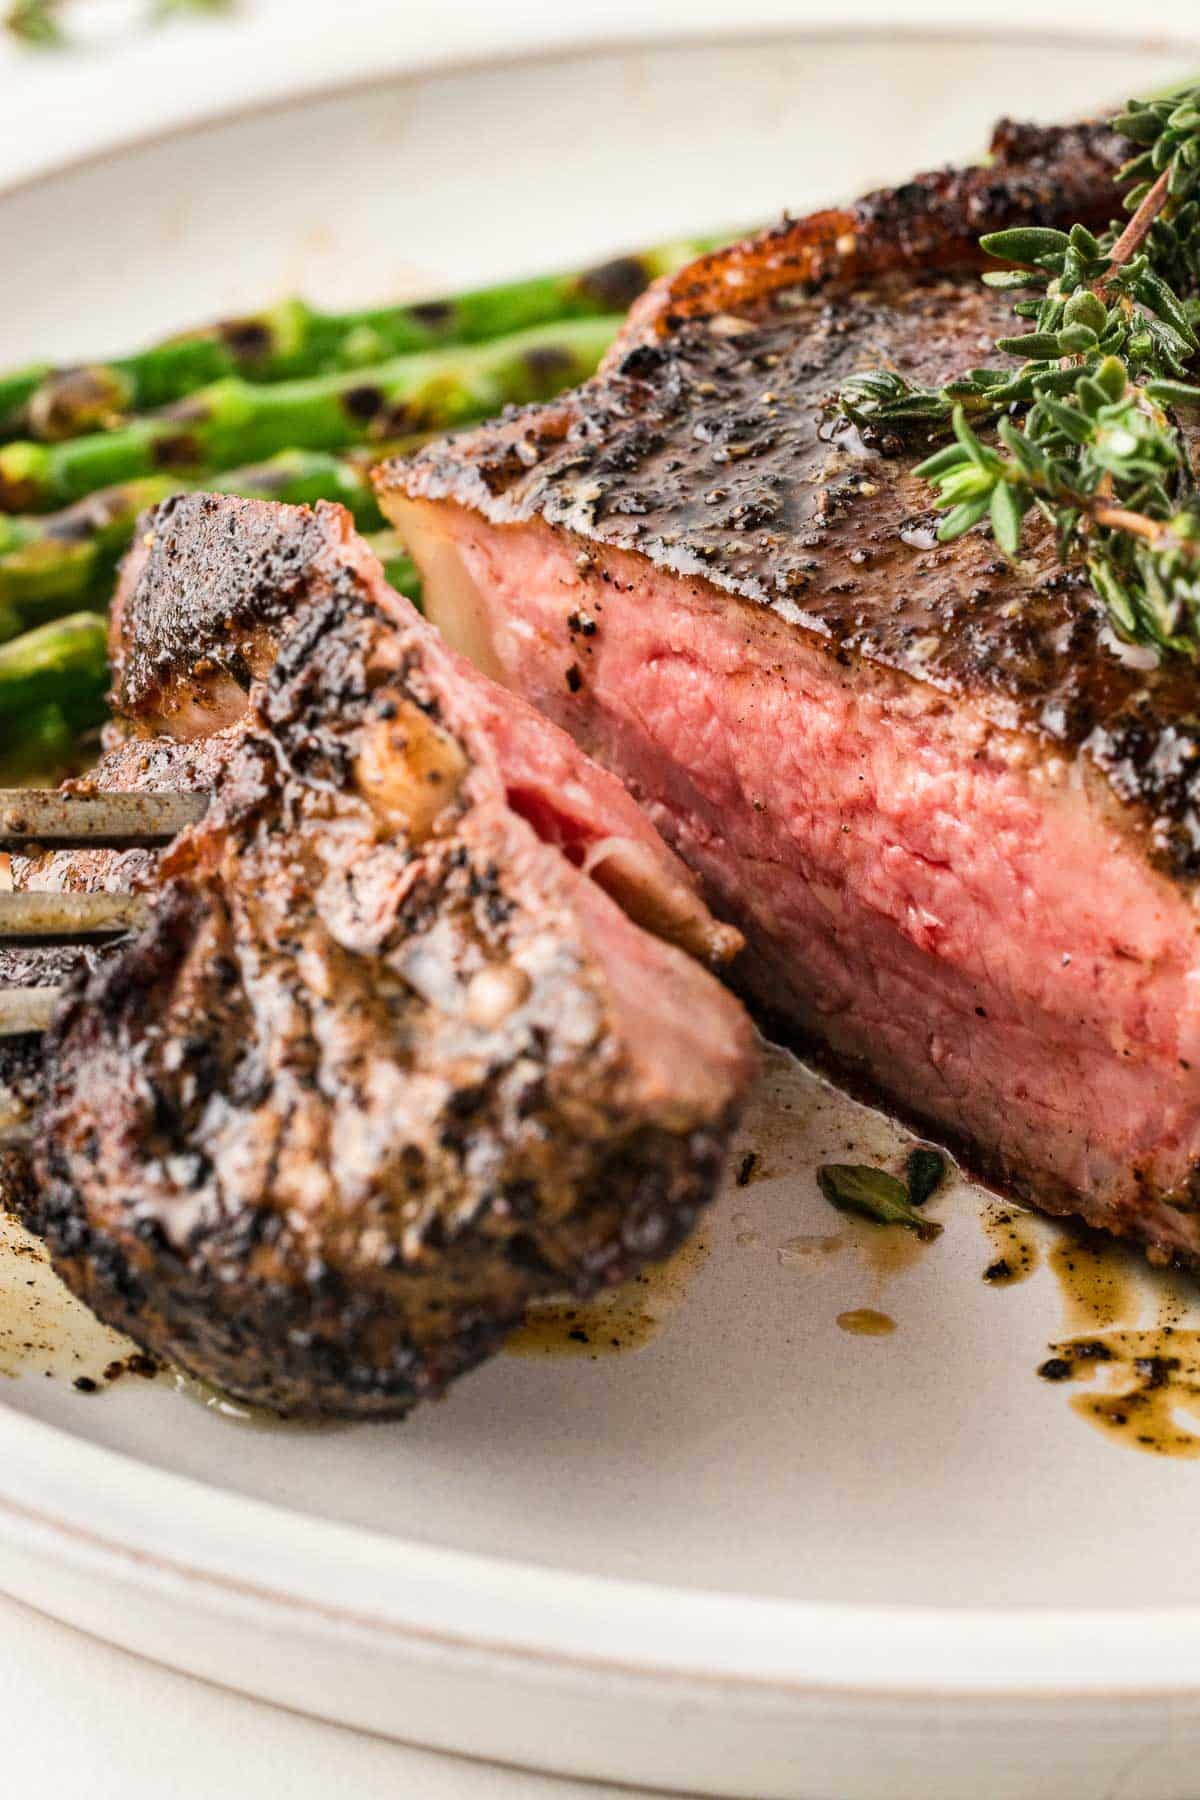 A blackened steak with asparagus and herbs on a plate.